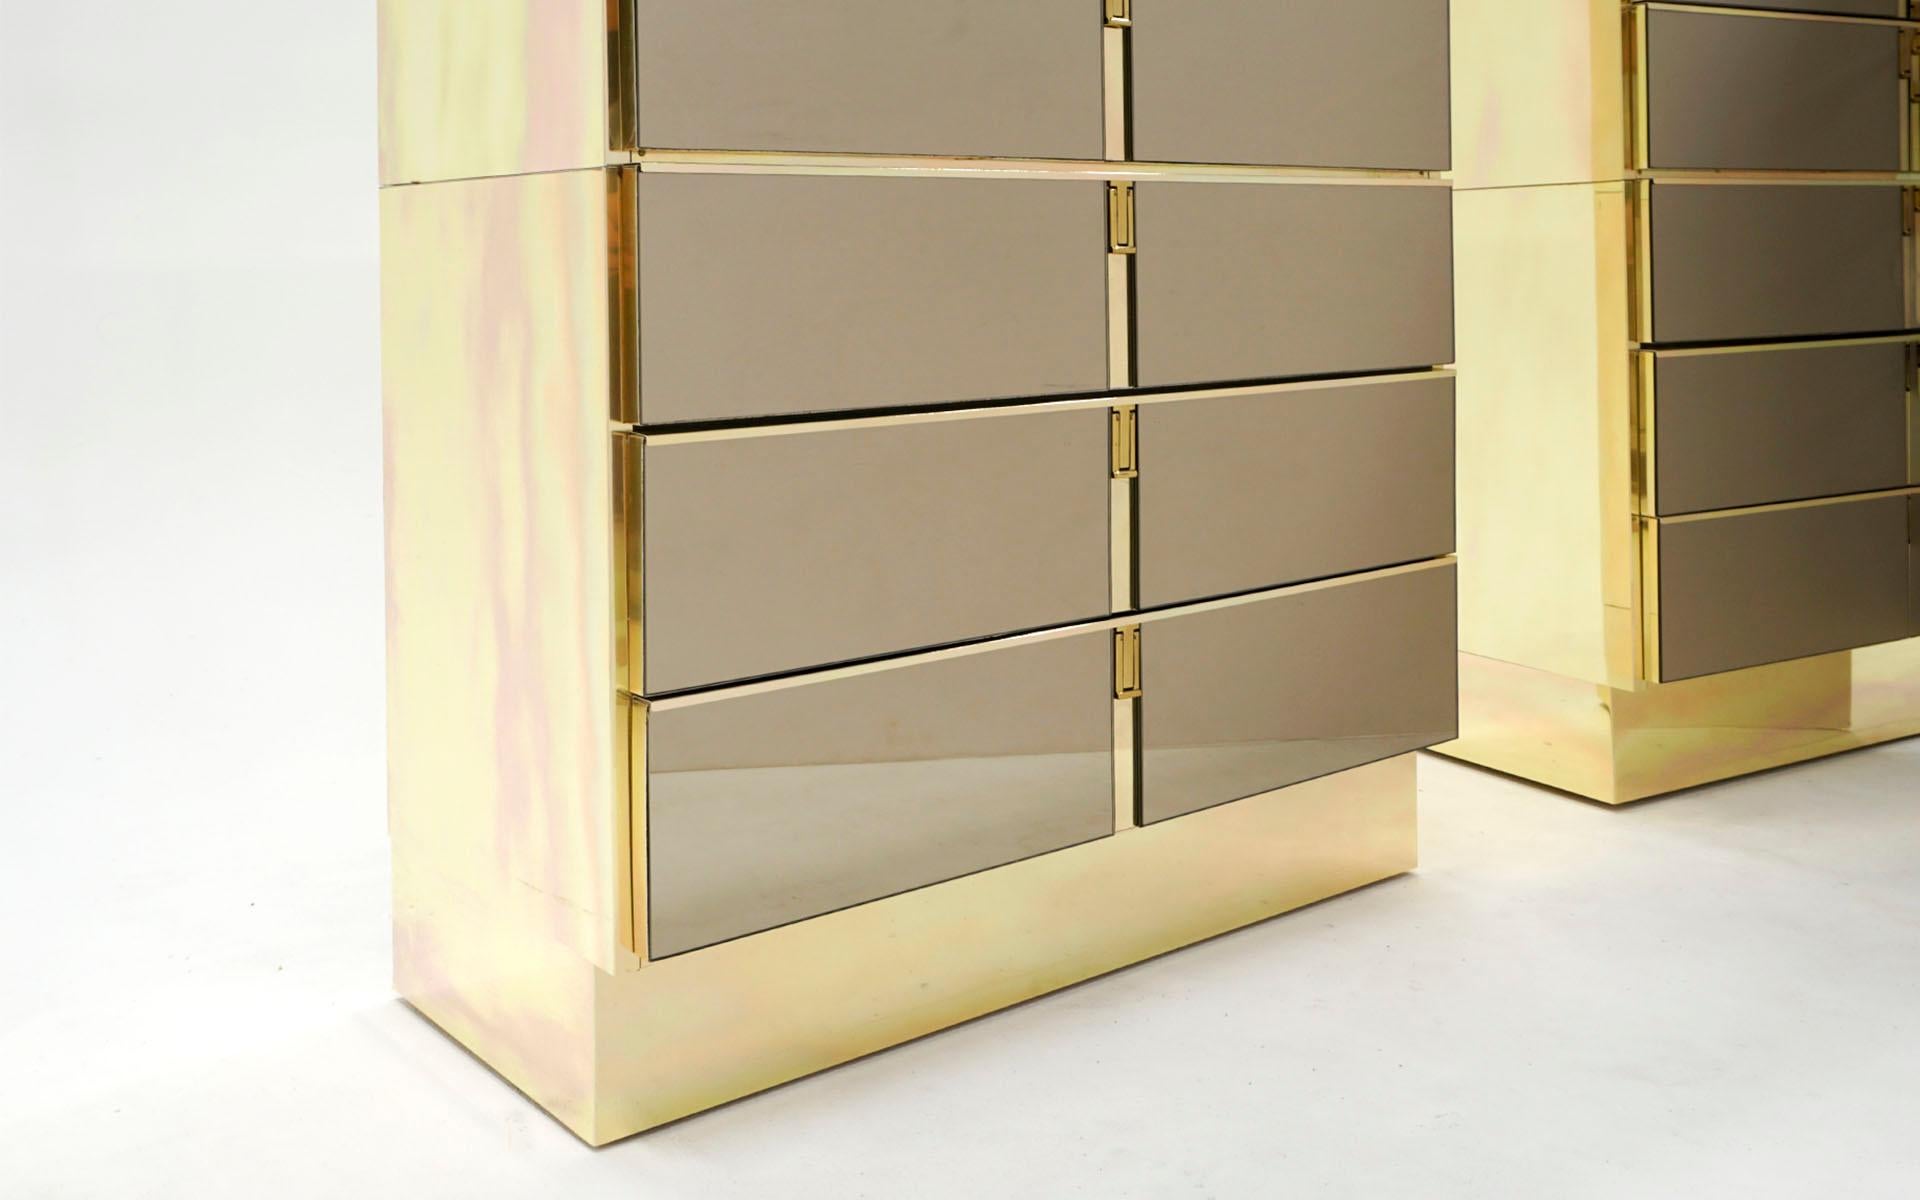 American Set of Stacked Ello Dressers / Chests of Drawers in Bronze Mirror and Brass